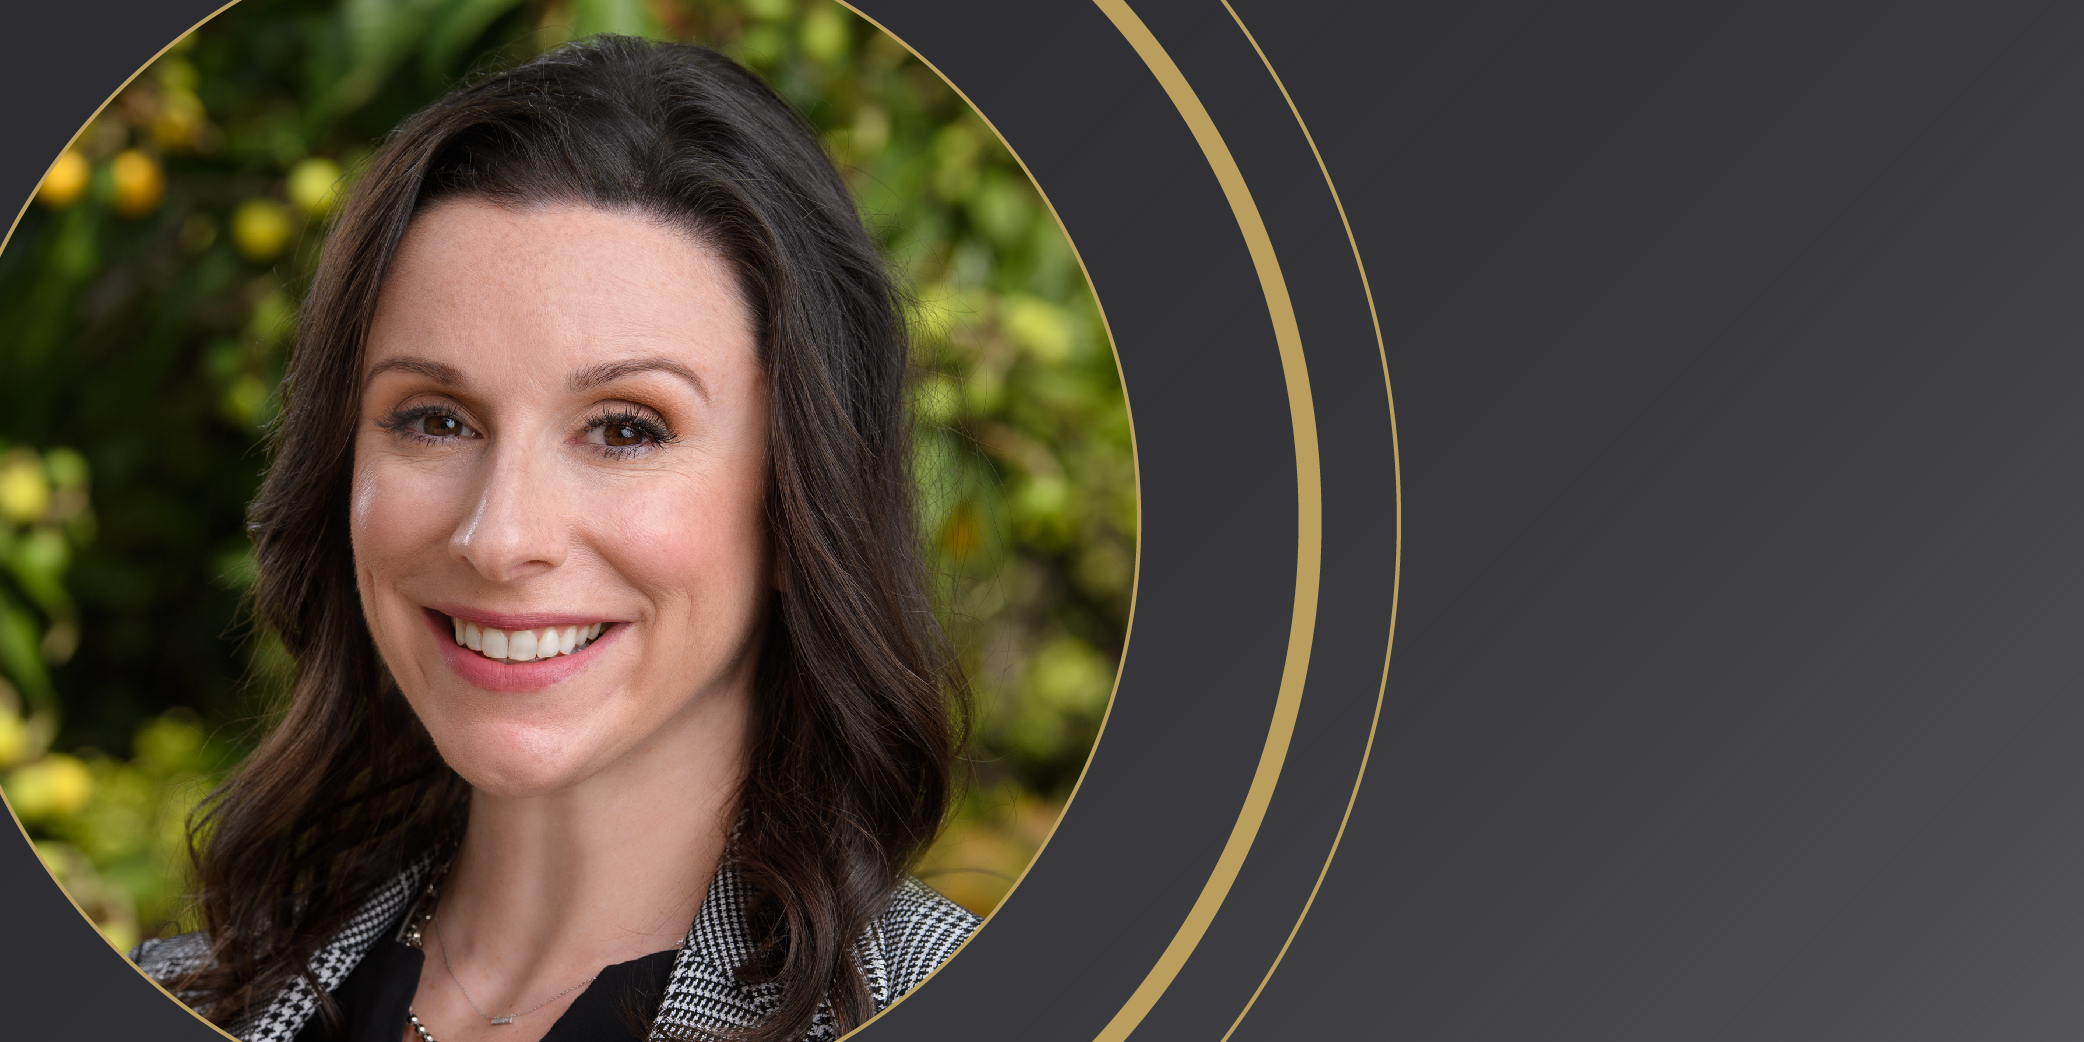 ACADEMY APPOINTS FORMER ACADEMY EXECUTIVE MEREDITH SHEA TO THE NEWLY CREATED ROLE OF CHIEF MEMBERSHIP, IMPACT, AND INDUSTRY OFFICER